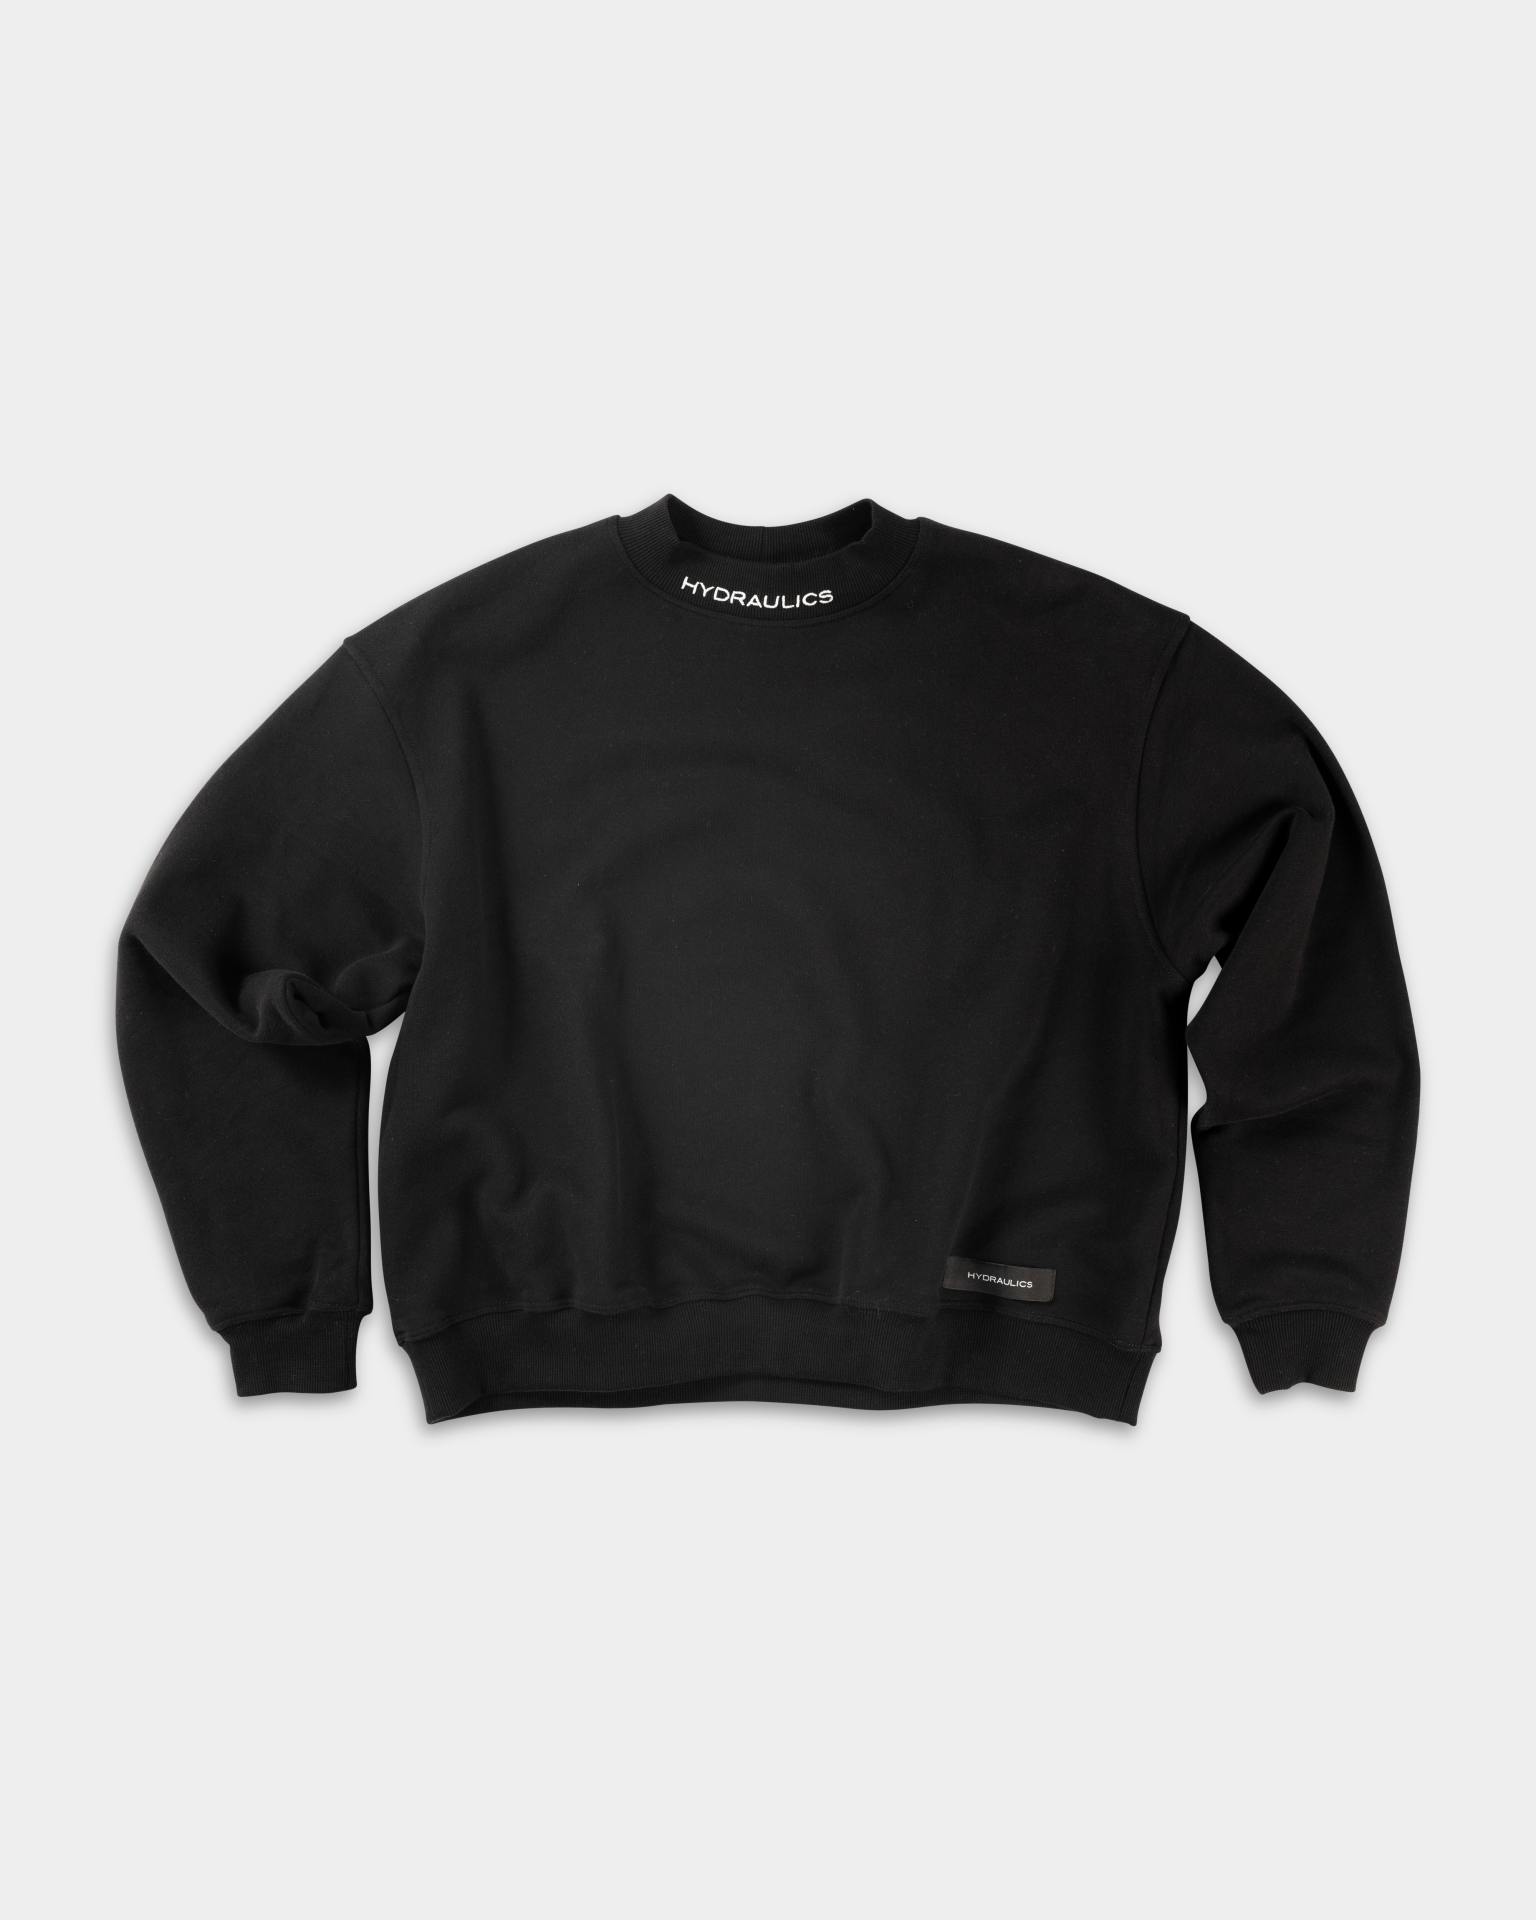 Hydraulics Logo Embroided Collar Sweater Black - Hydraulics Stores